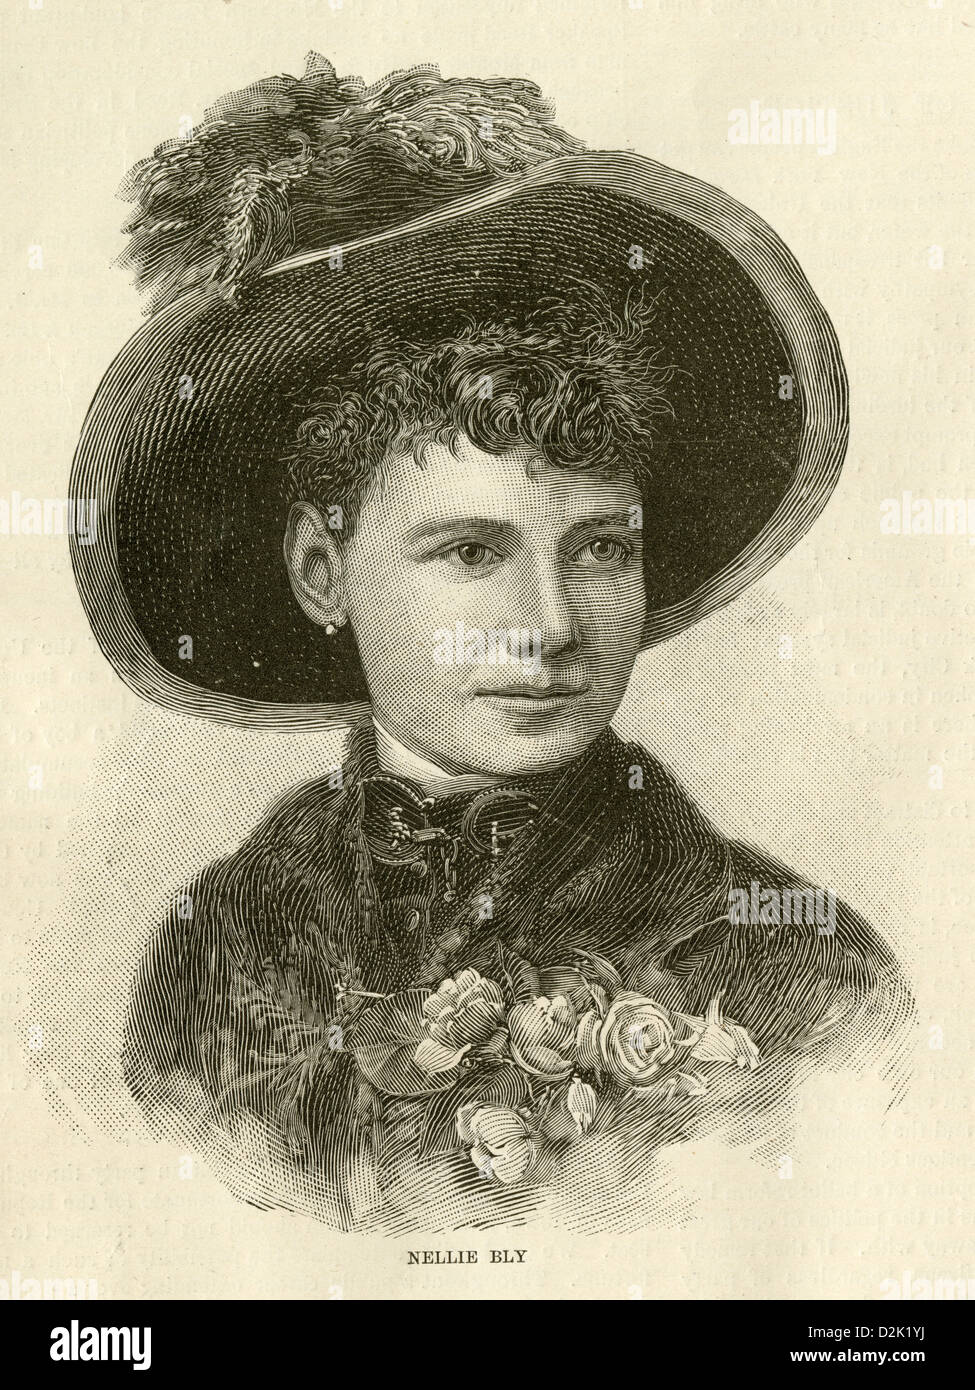 1890 incisione, Nellie Bly. Foto Stock